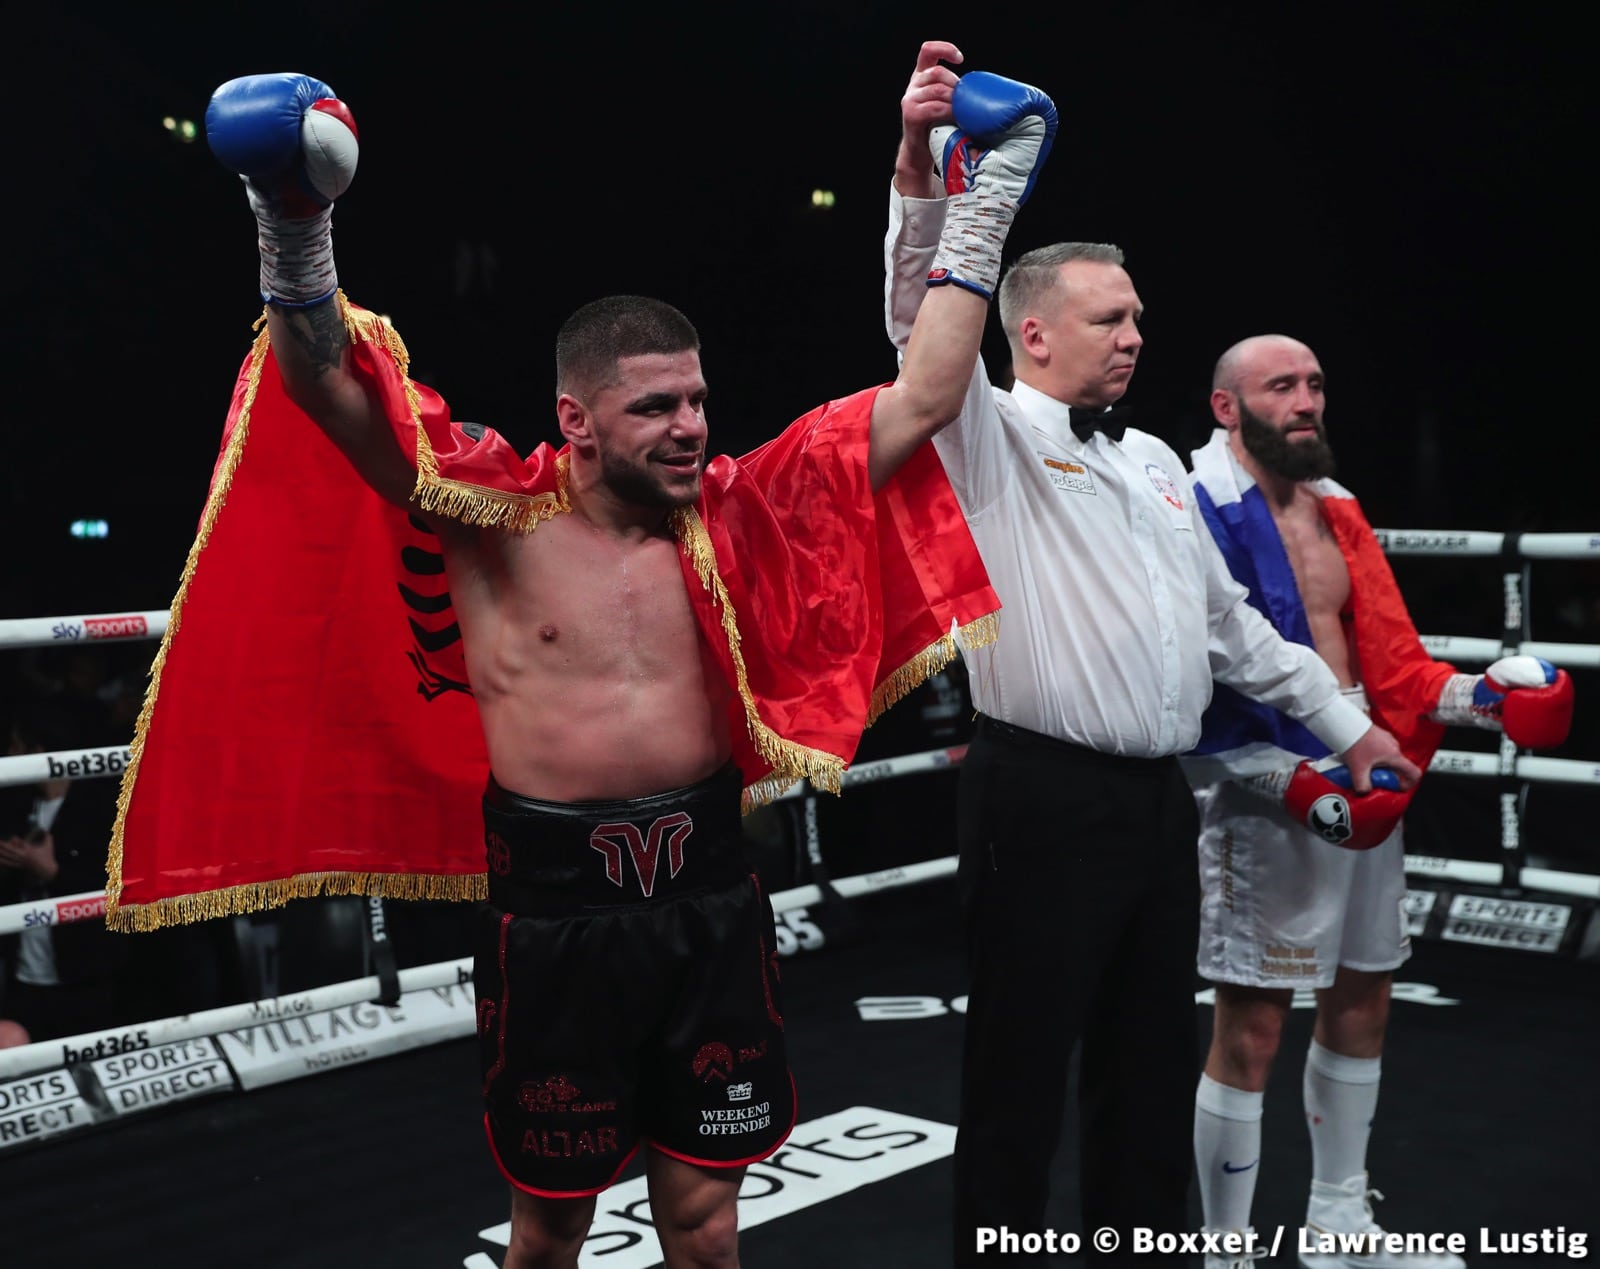 Results from BOXXER & Sky Sports Boxing Fight Night London